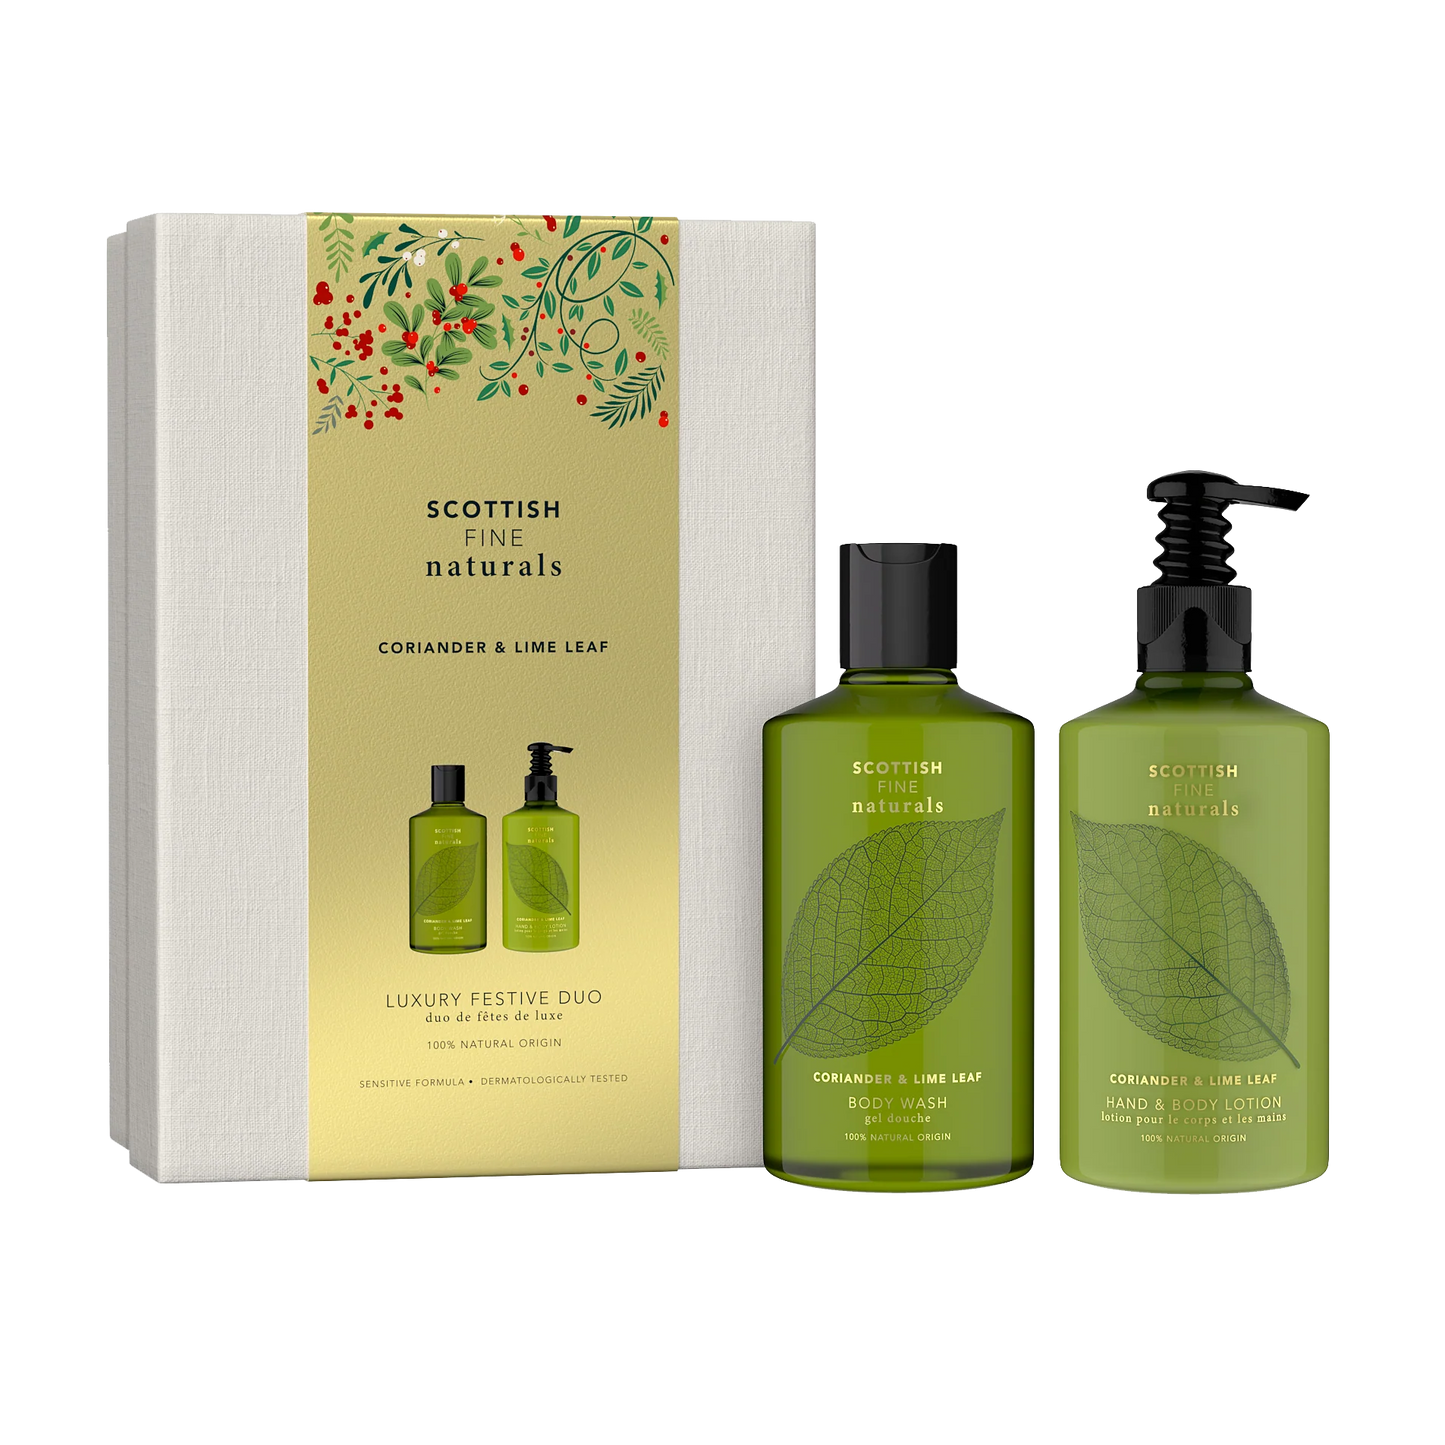 Coriander & Lime Leaf Luxury Festive Duo by The Scottish Fine Soaps Company